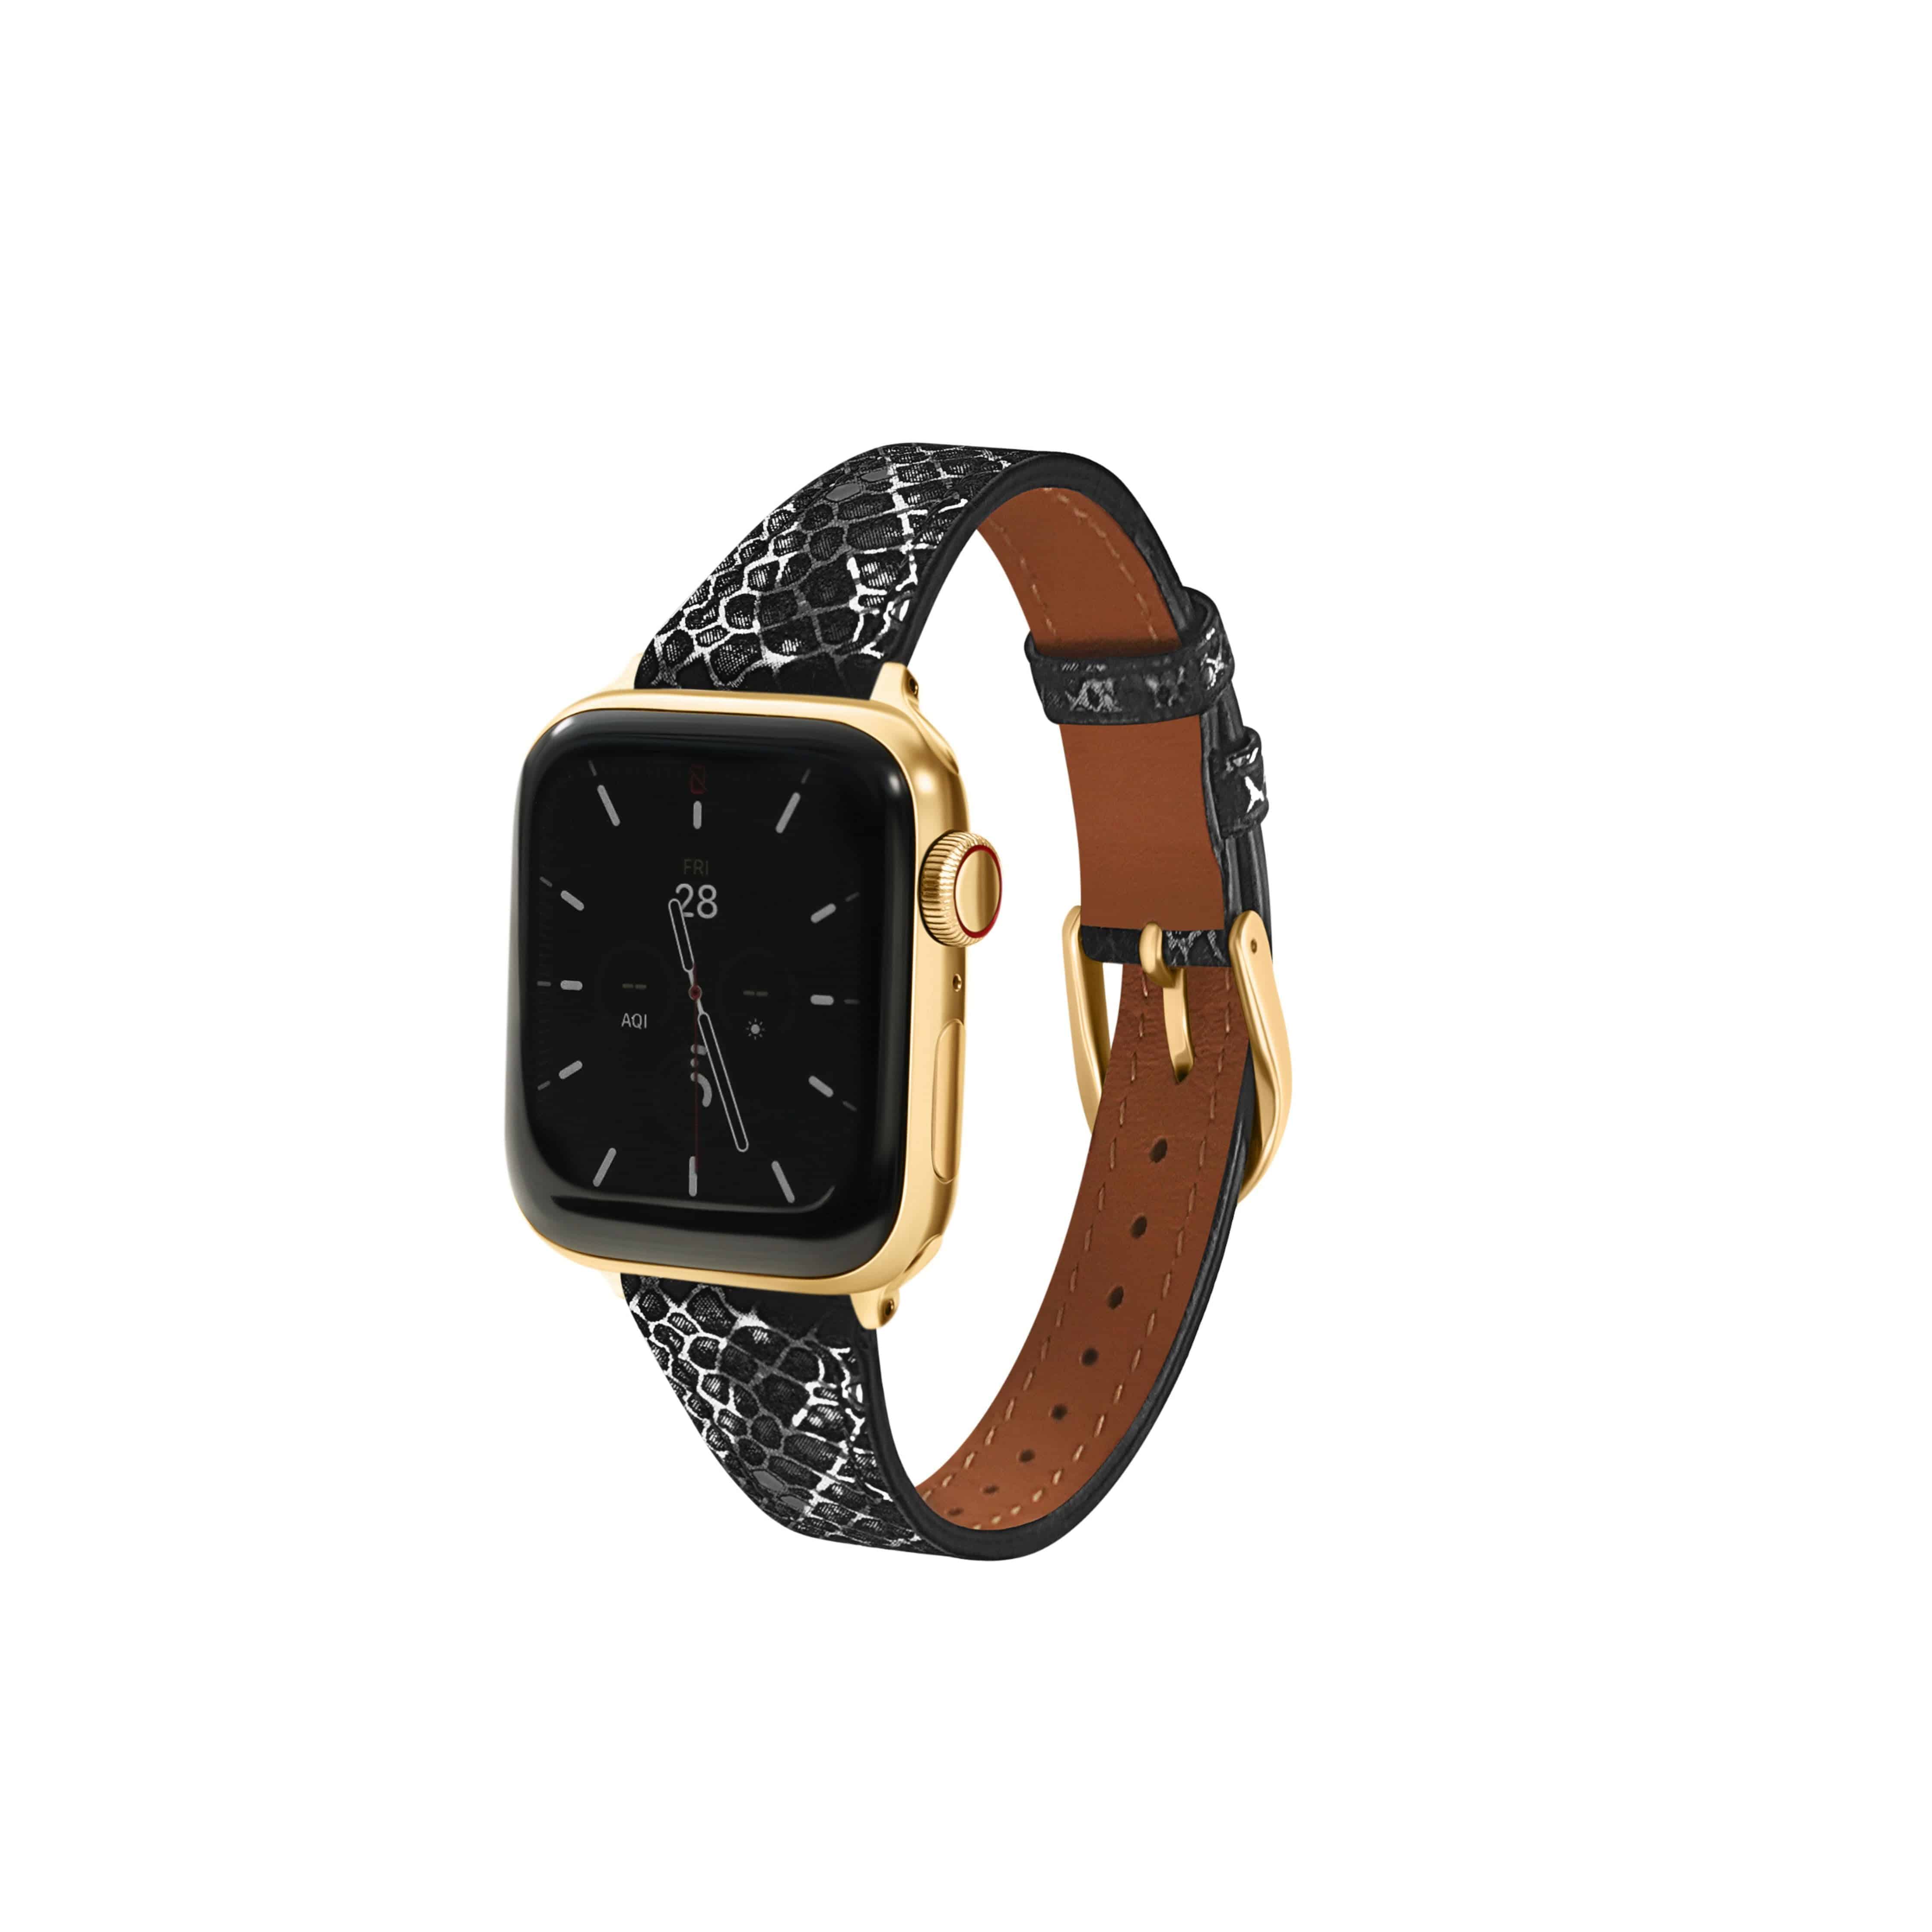 Metallic Snakeskin Printed Band for the Apple Watch - FINAL SALE